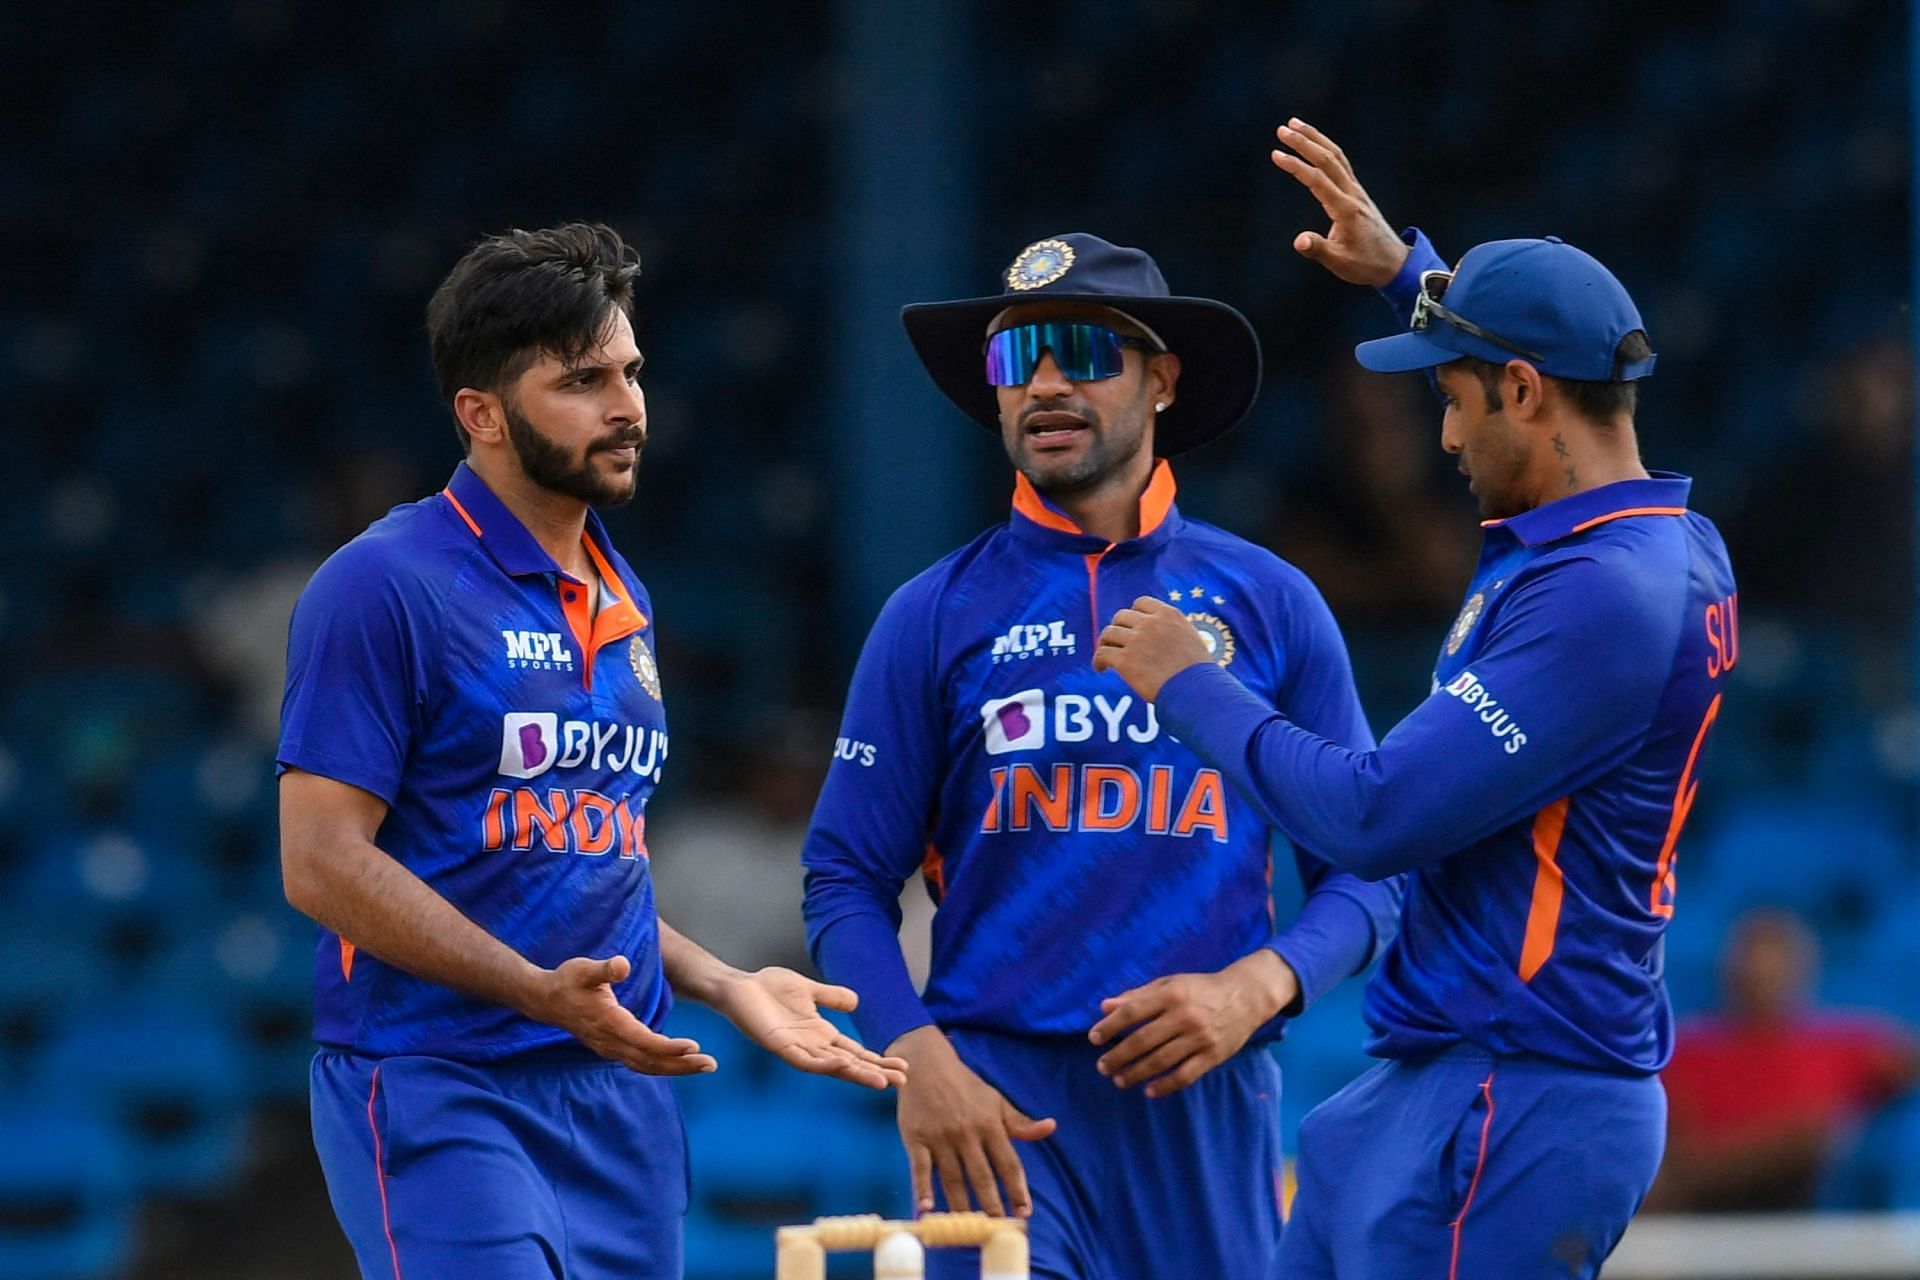 Shardul Thakur has been amongst the wickets in the ODI series against the West Indies [P/C: BCCI/Twitter]